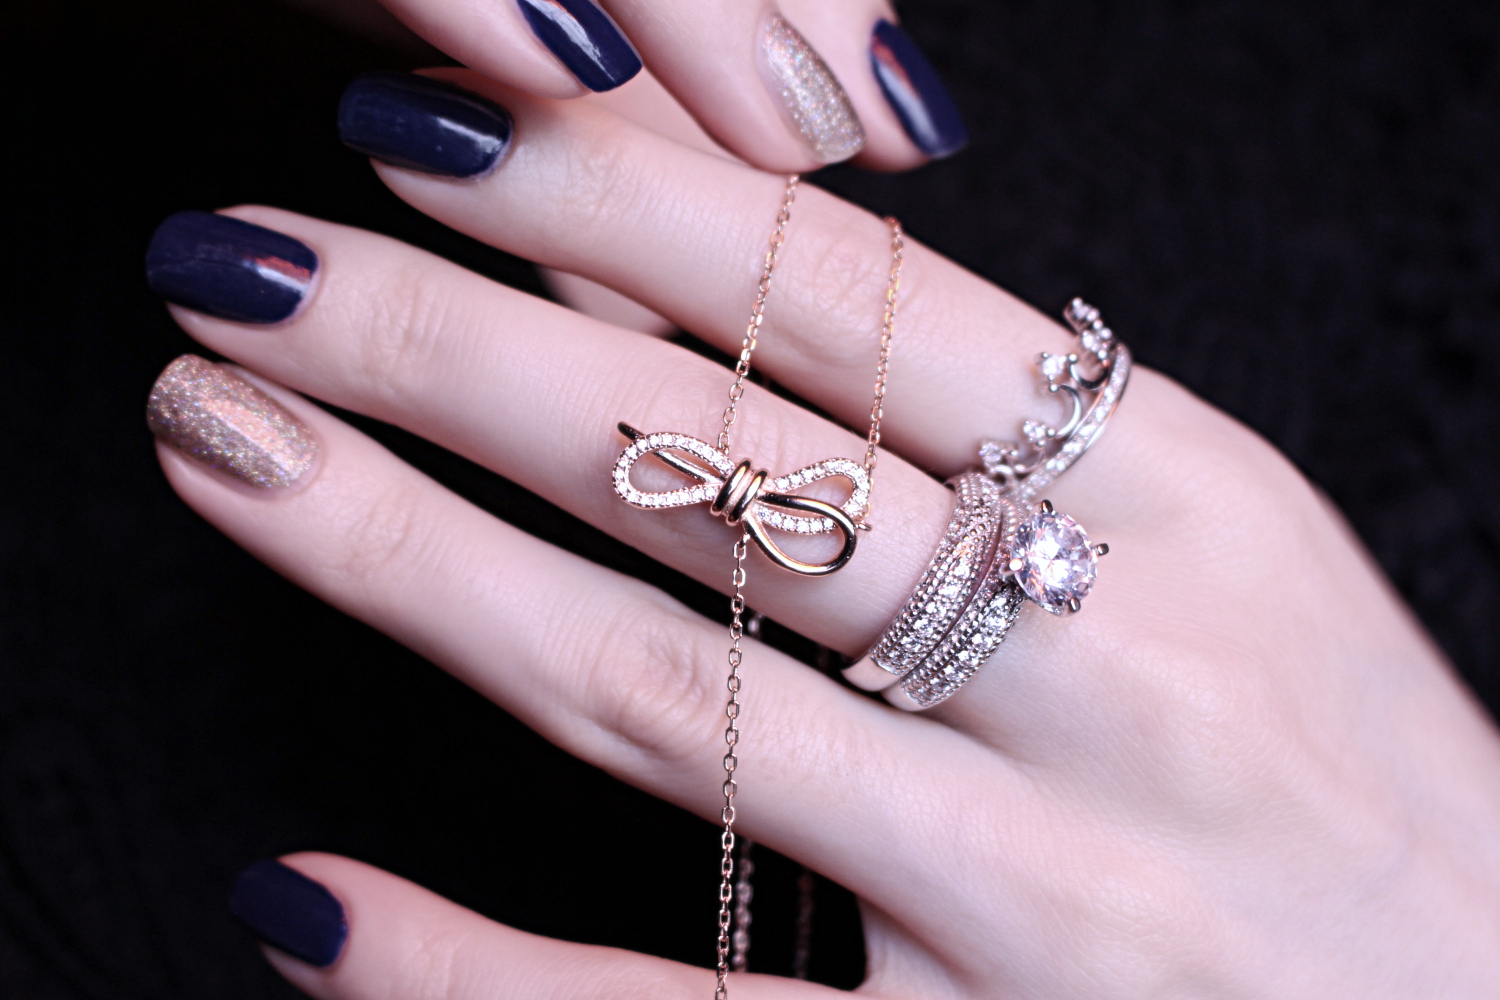 close-up of a woman's hand holding few silver jewelry pieces